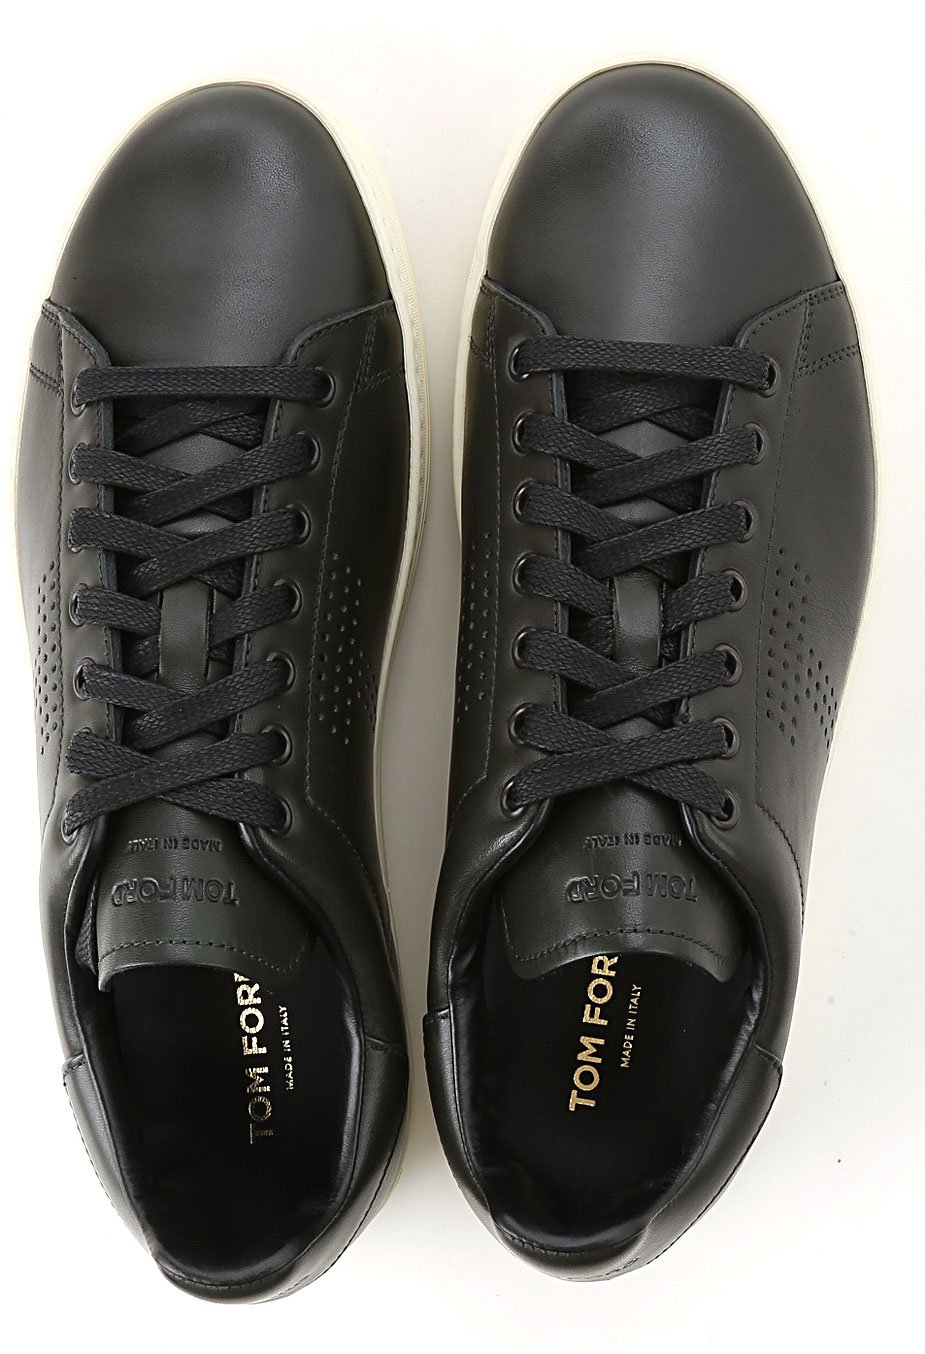 Mens Shoes Tom Ford, Style code: j1045t-vcl-ver